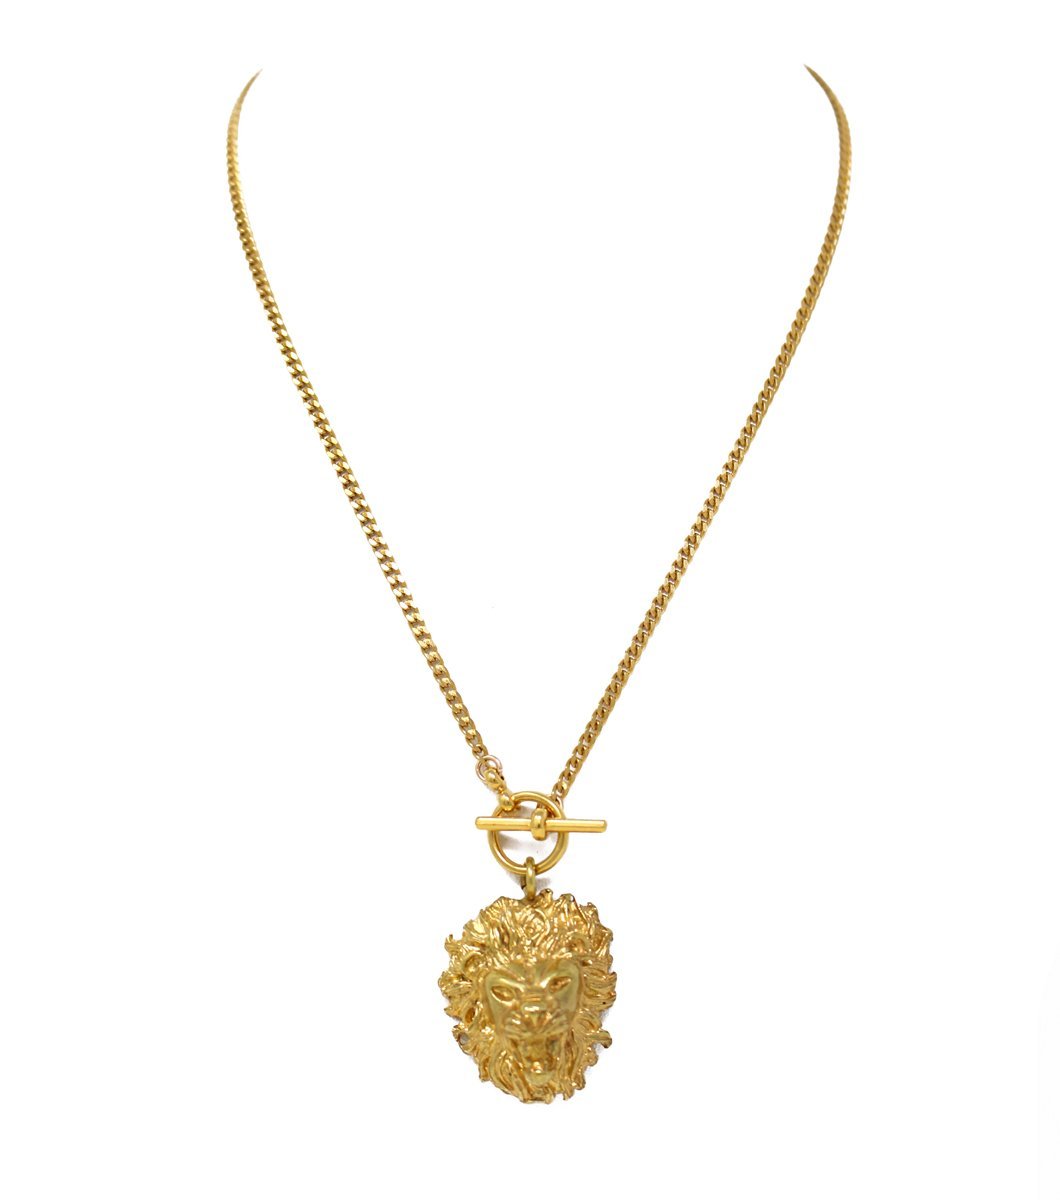 Lion Necklace - LAURA CANTU JEWELRY US